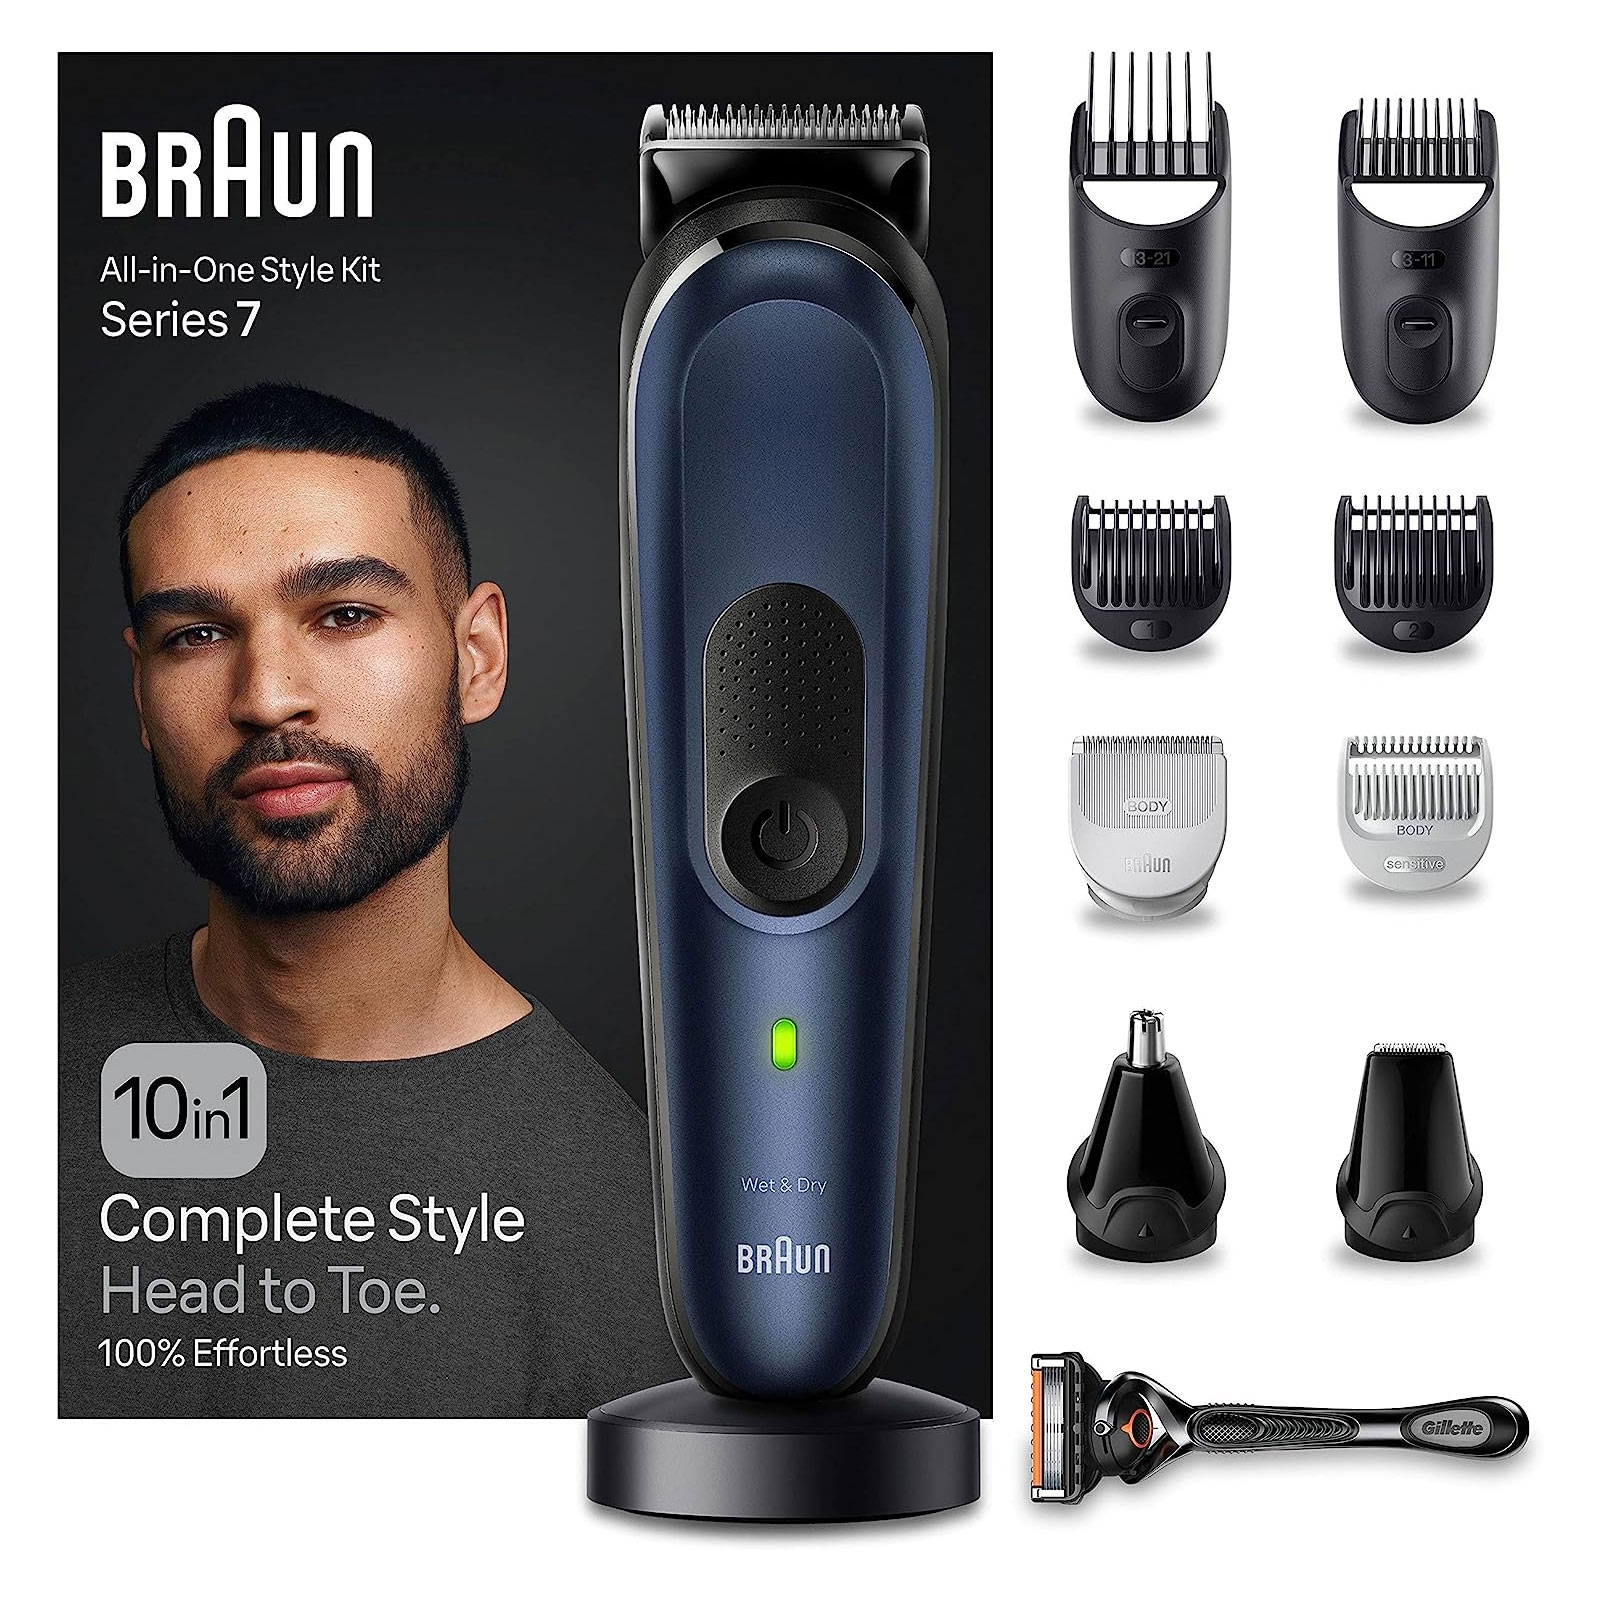 Braun Series 7 MGK7410 All-In-One Styling Set 10-in-1